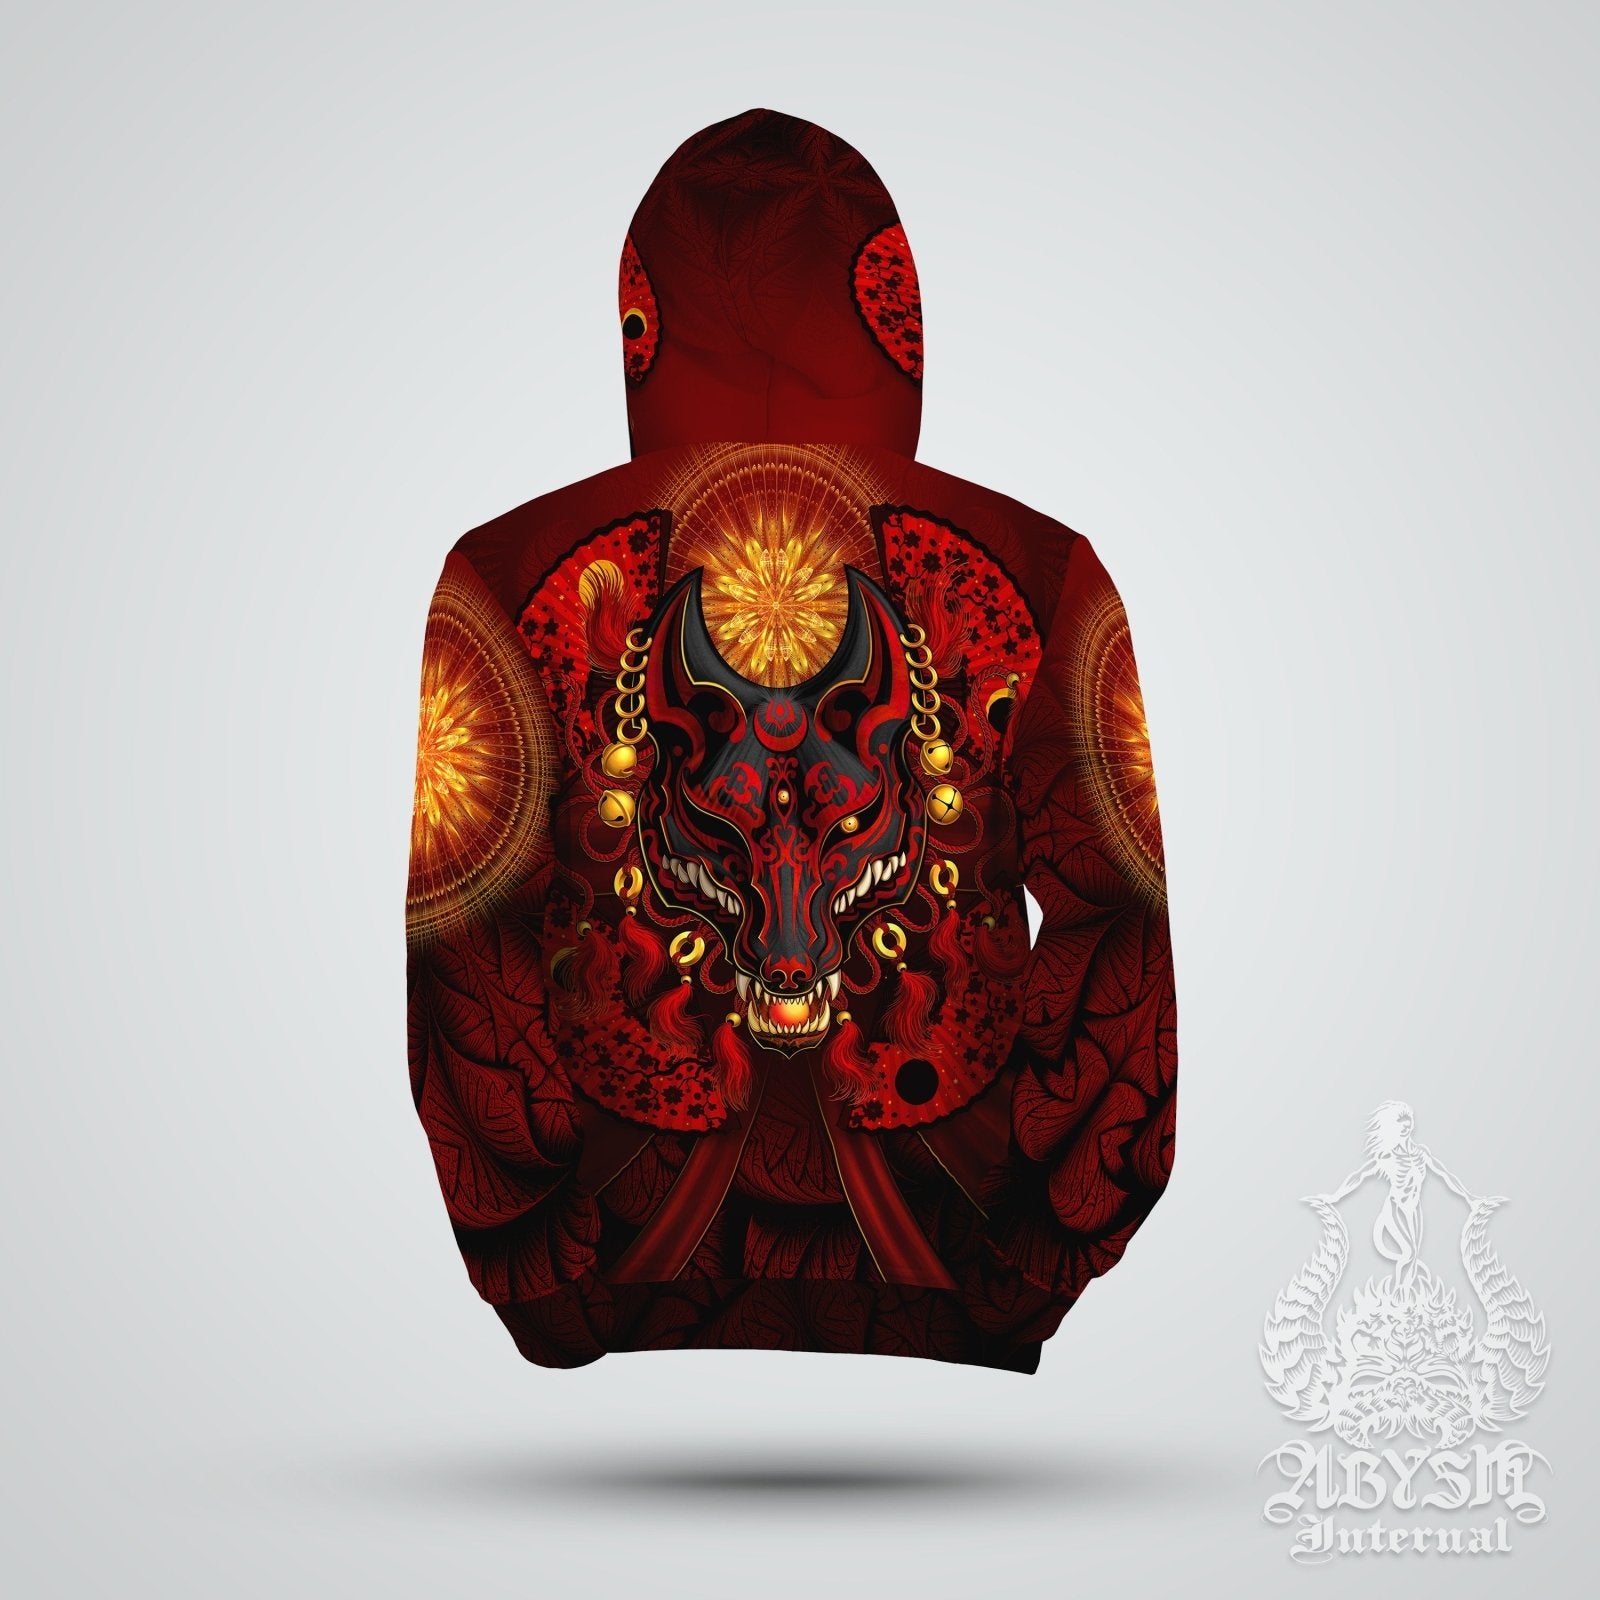 Anime Hoodie, Street Outfit, Japanese Streetwear, Gamer Apparel, Alternative Clothing, Unisex - Fox or Kitsune Mask, Red and Black - Abysm Internal